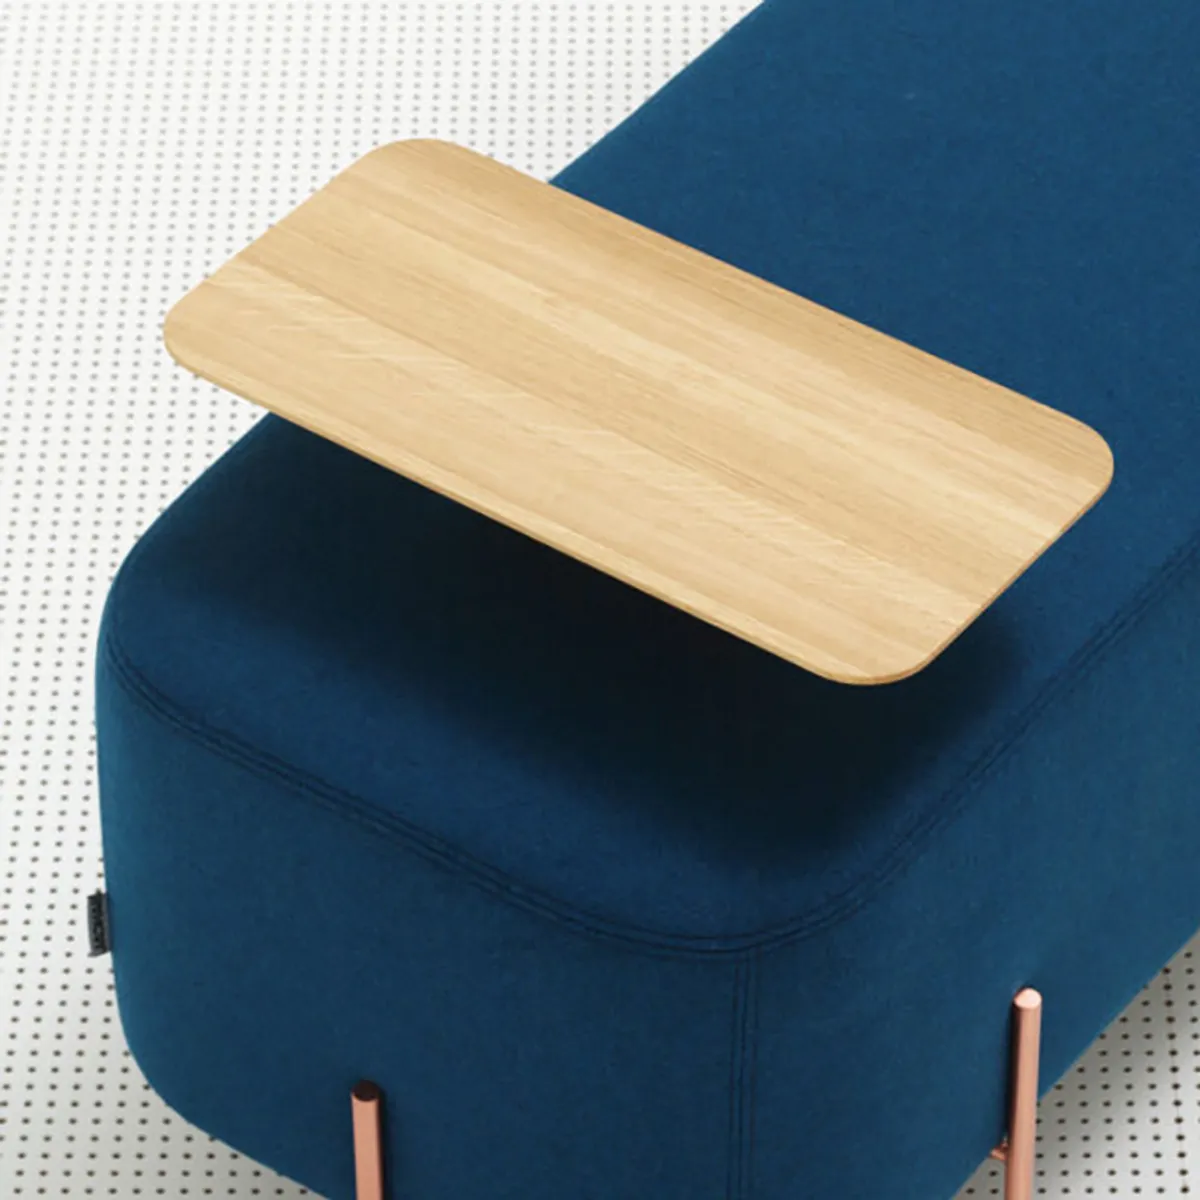 Elephant Bench In Blue With Side Table Modular Furniture By Inside Out Contracts